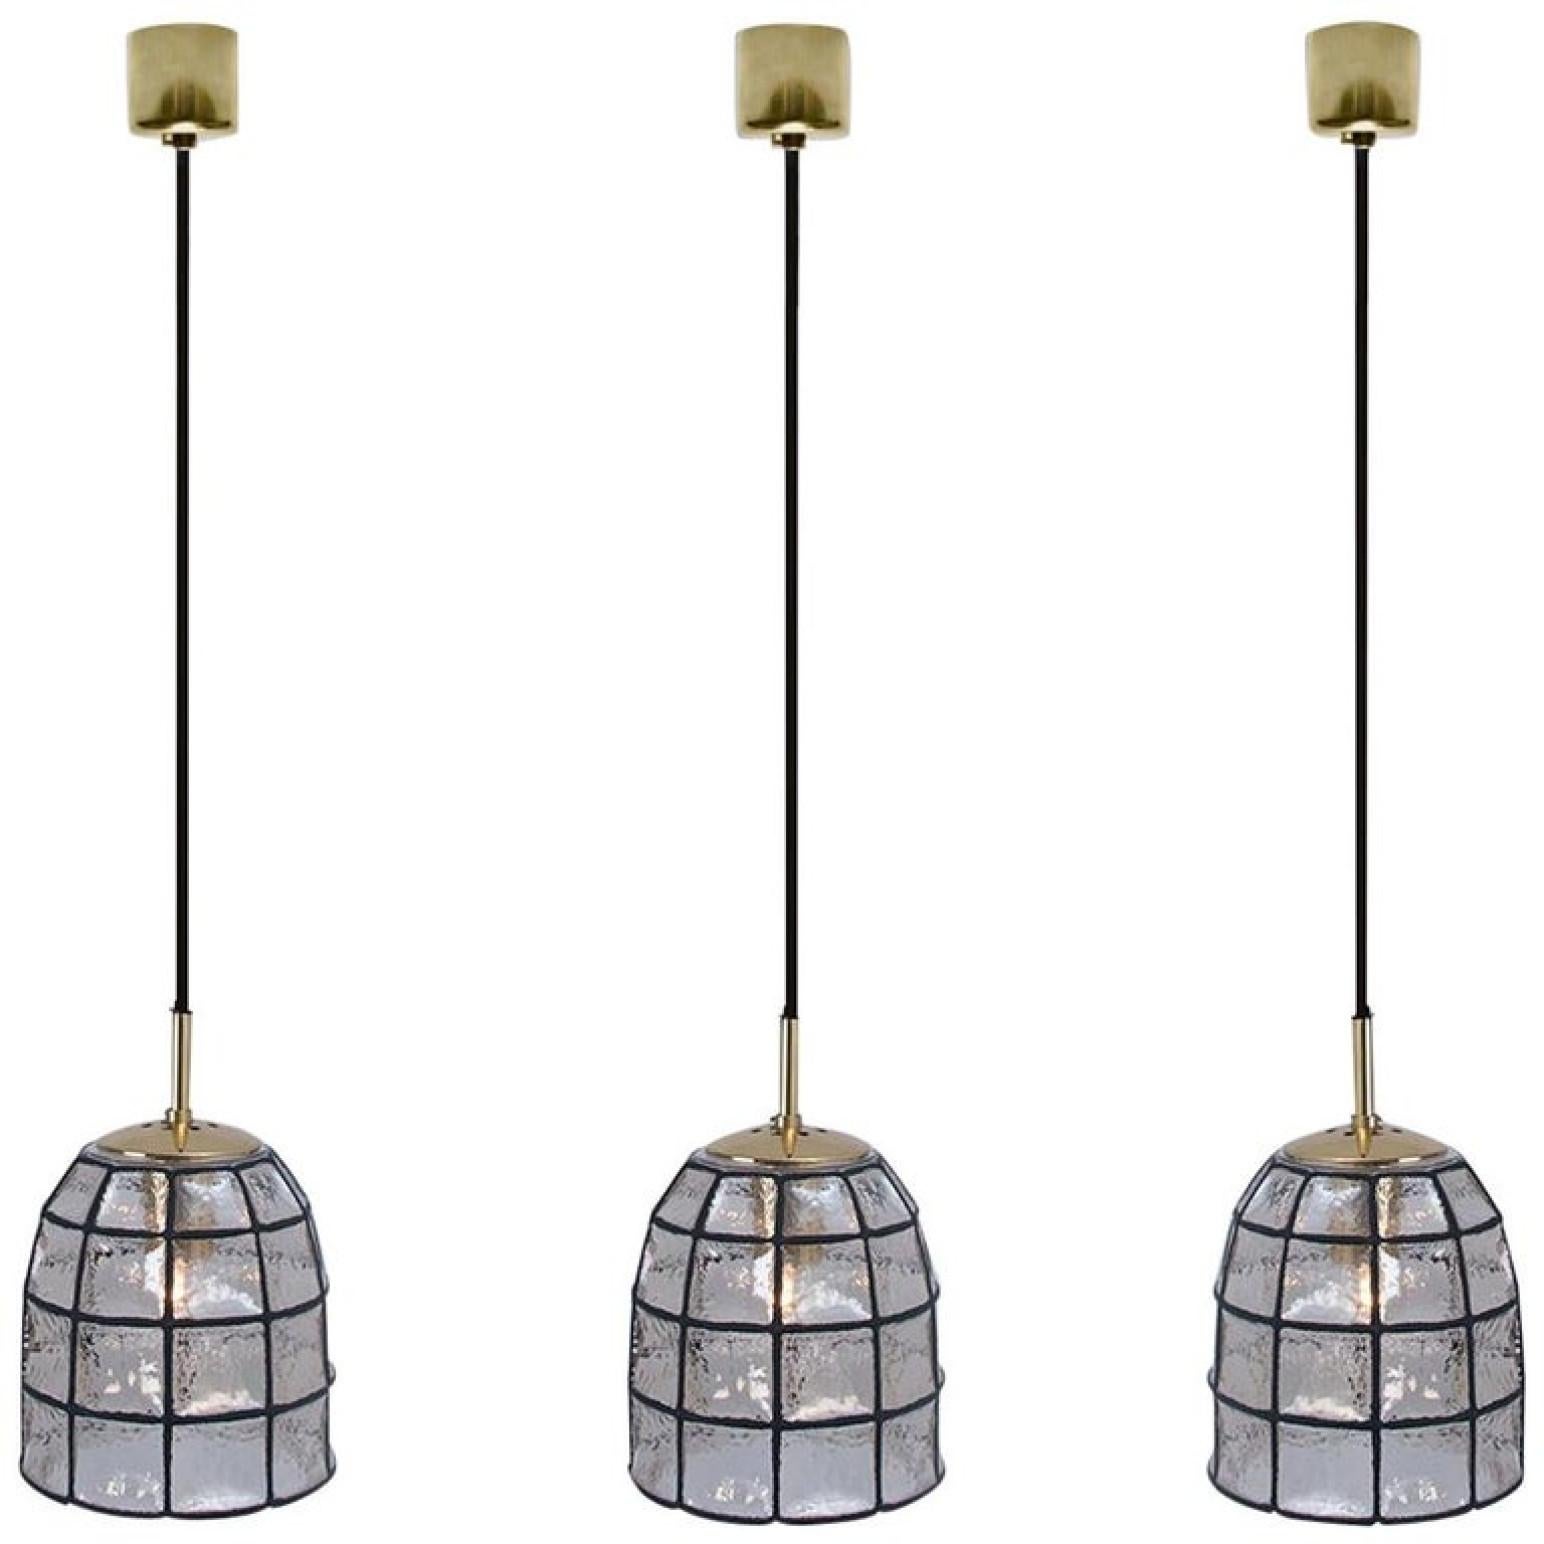 This beautiful set octagonal glass light fixtures were manufactured by Glashütte Limburg in Germany during the 1960s. Beautiful craftsmanship. Each lamp, made from thick elaborate clear glass with rectangular black accent elements features one E27